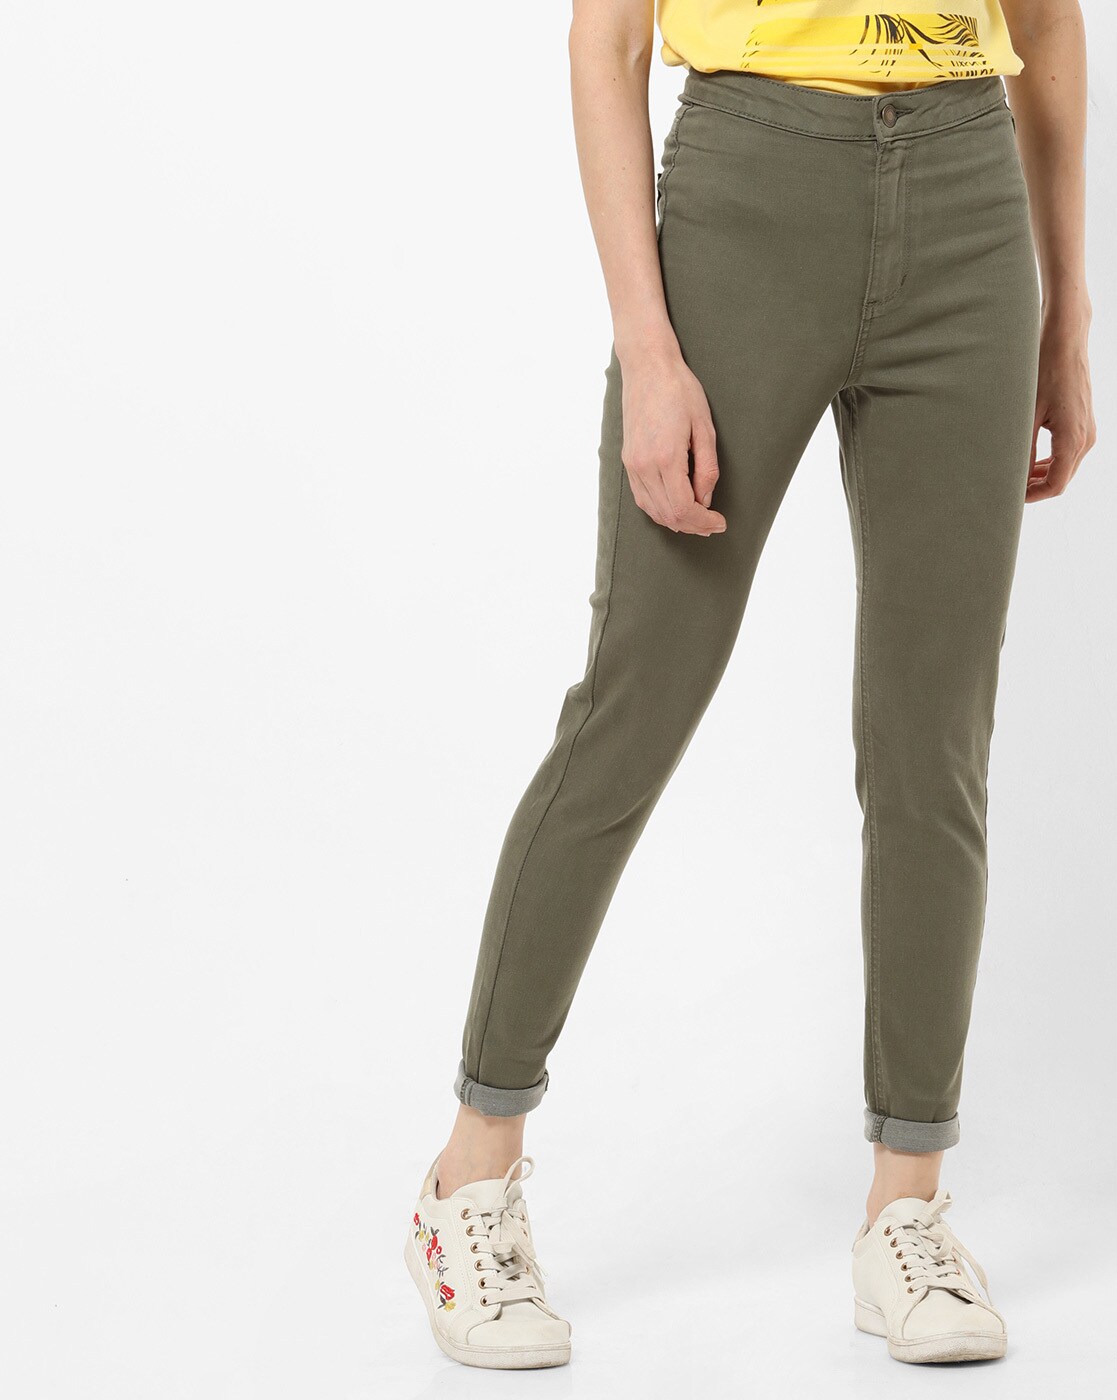 high rise olive green jeans